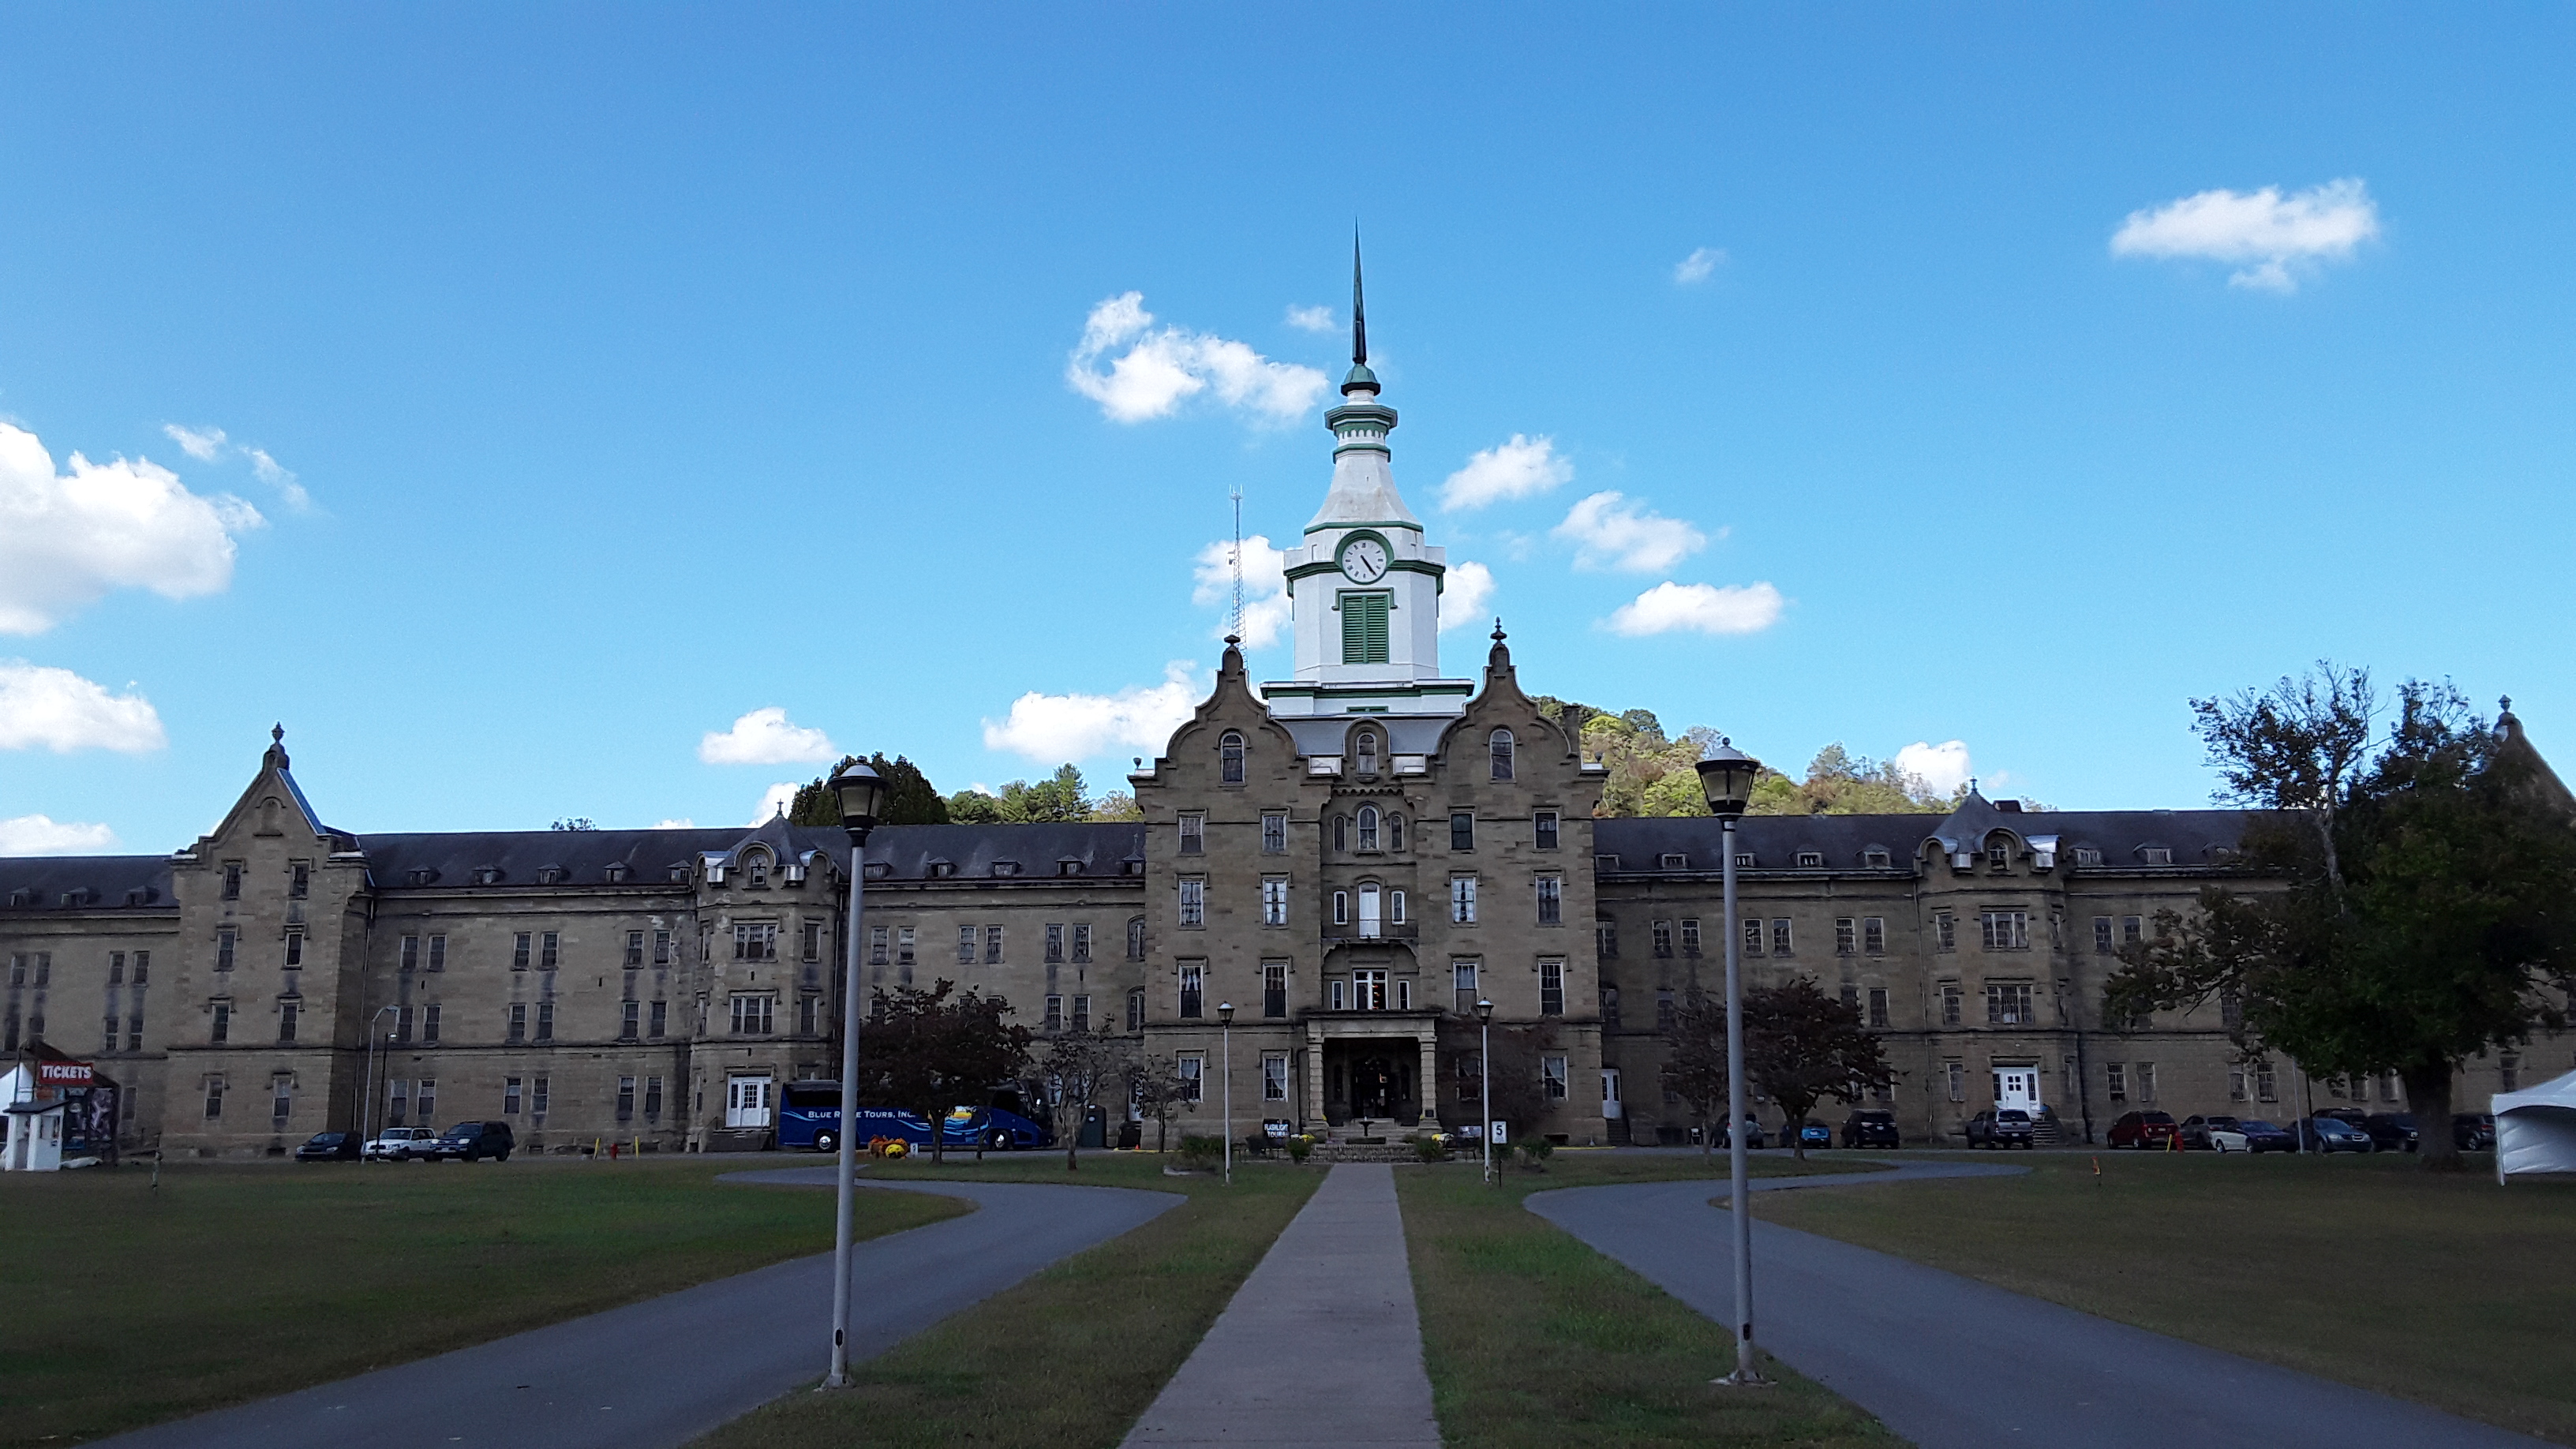 Trans-Allegheny Lunatic Asylum Tells the History of Mental Health in the United States